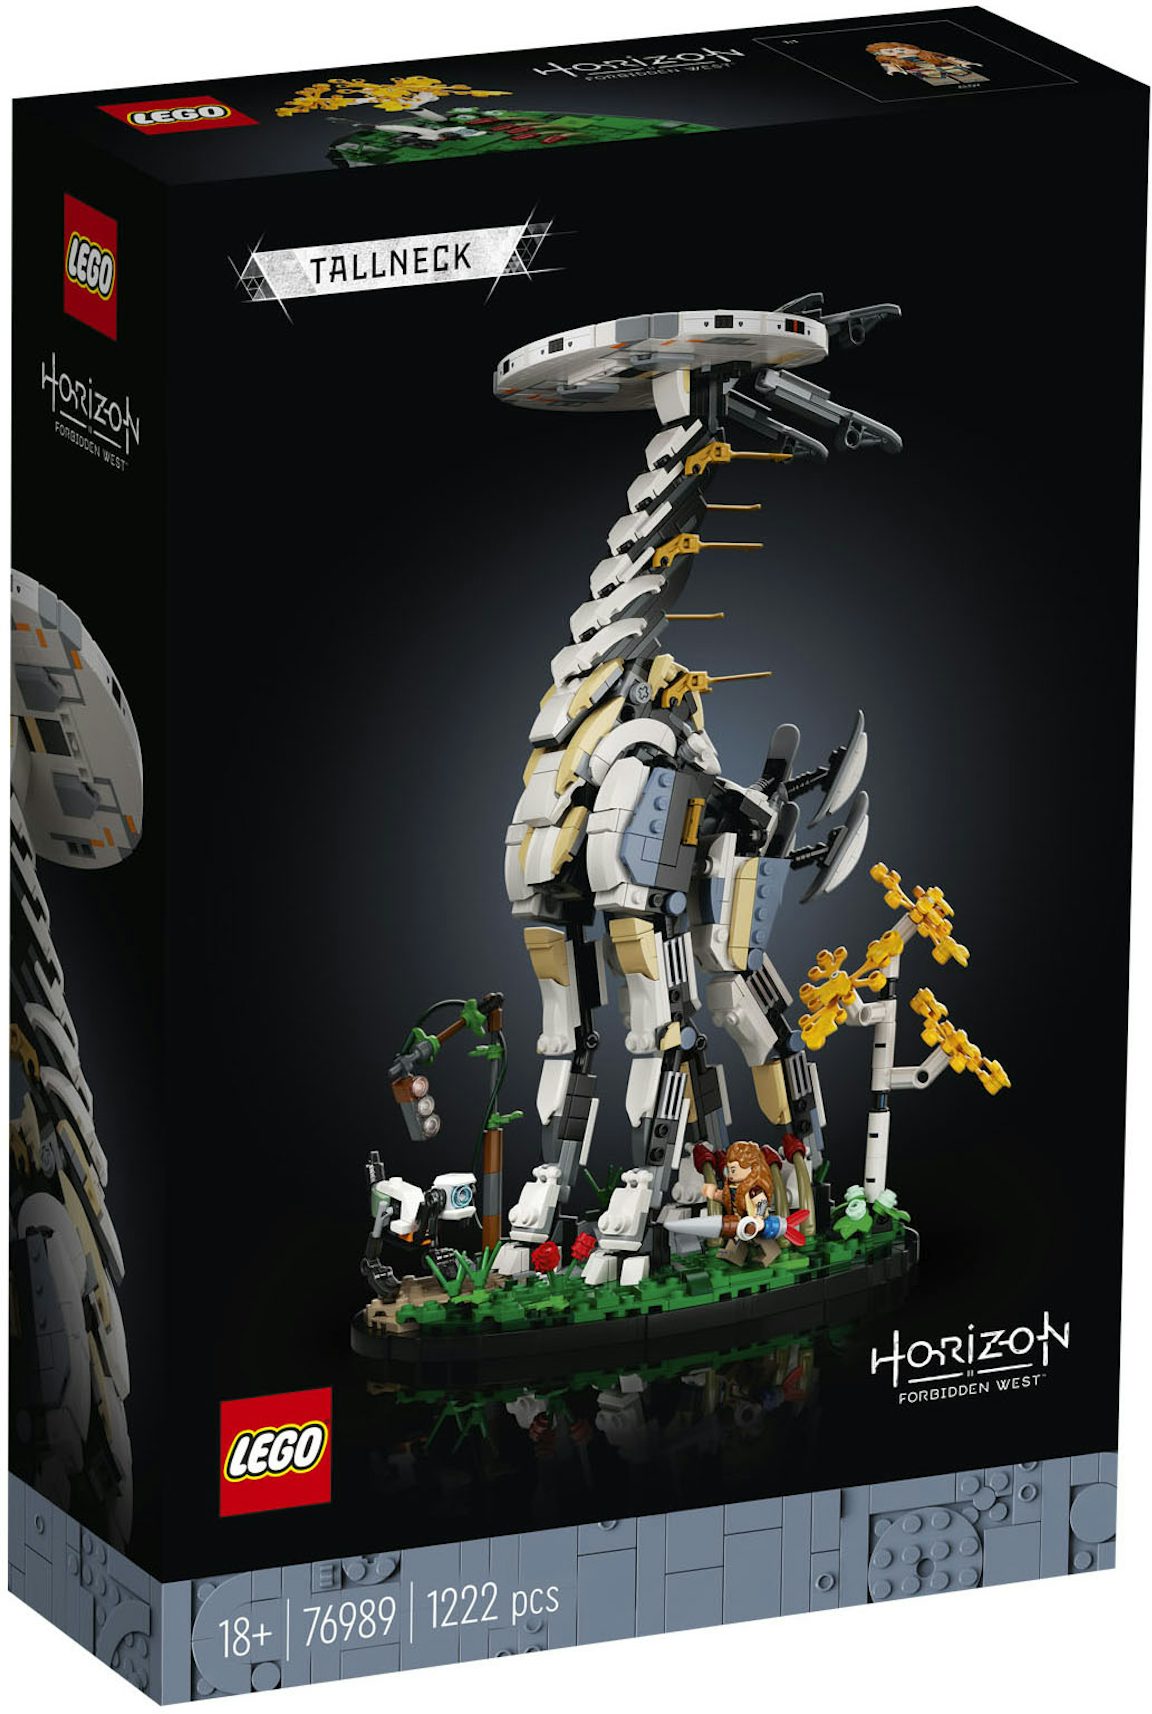 This Might be the BEST Lego Set of ALL TIME - Horizon Forbidden West  Tallneck Review! LEGO Set 76989 